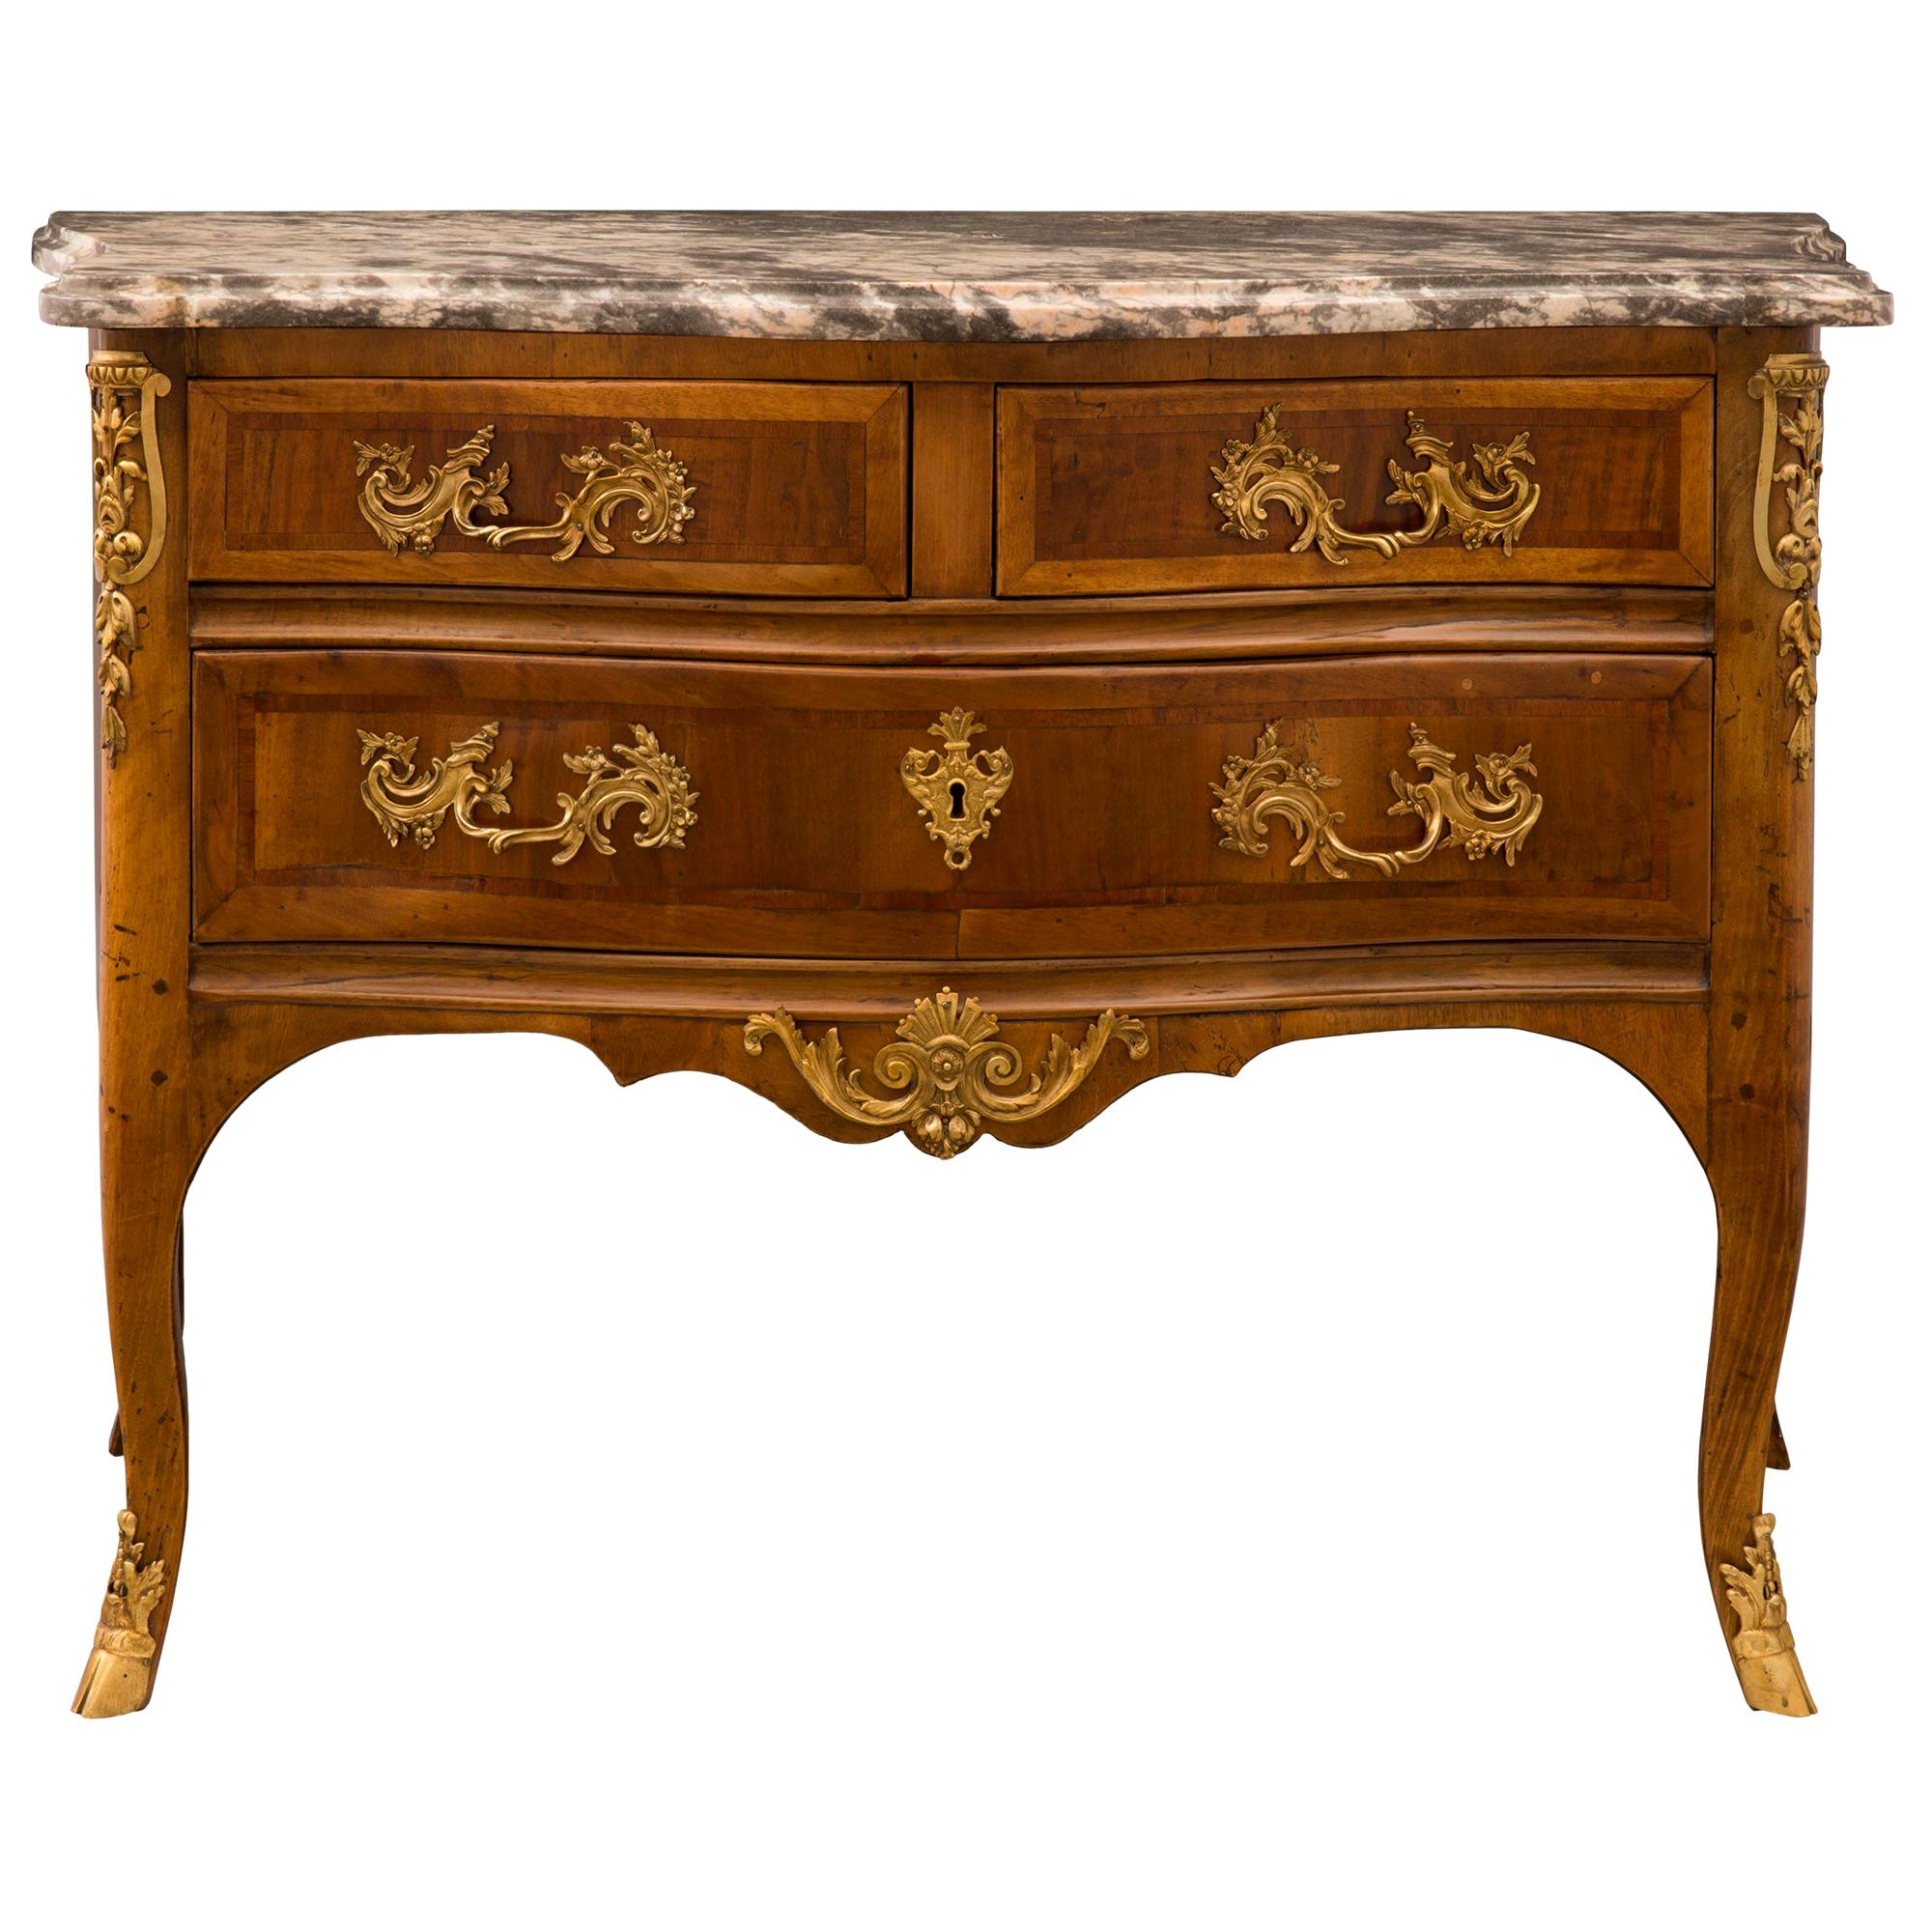 French 18th Century Régence Period Walnut, Fruitwood, Ormolu, and Marble Commode For Sale